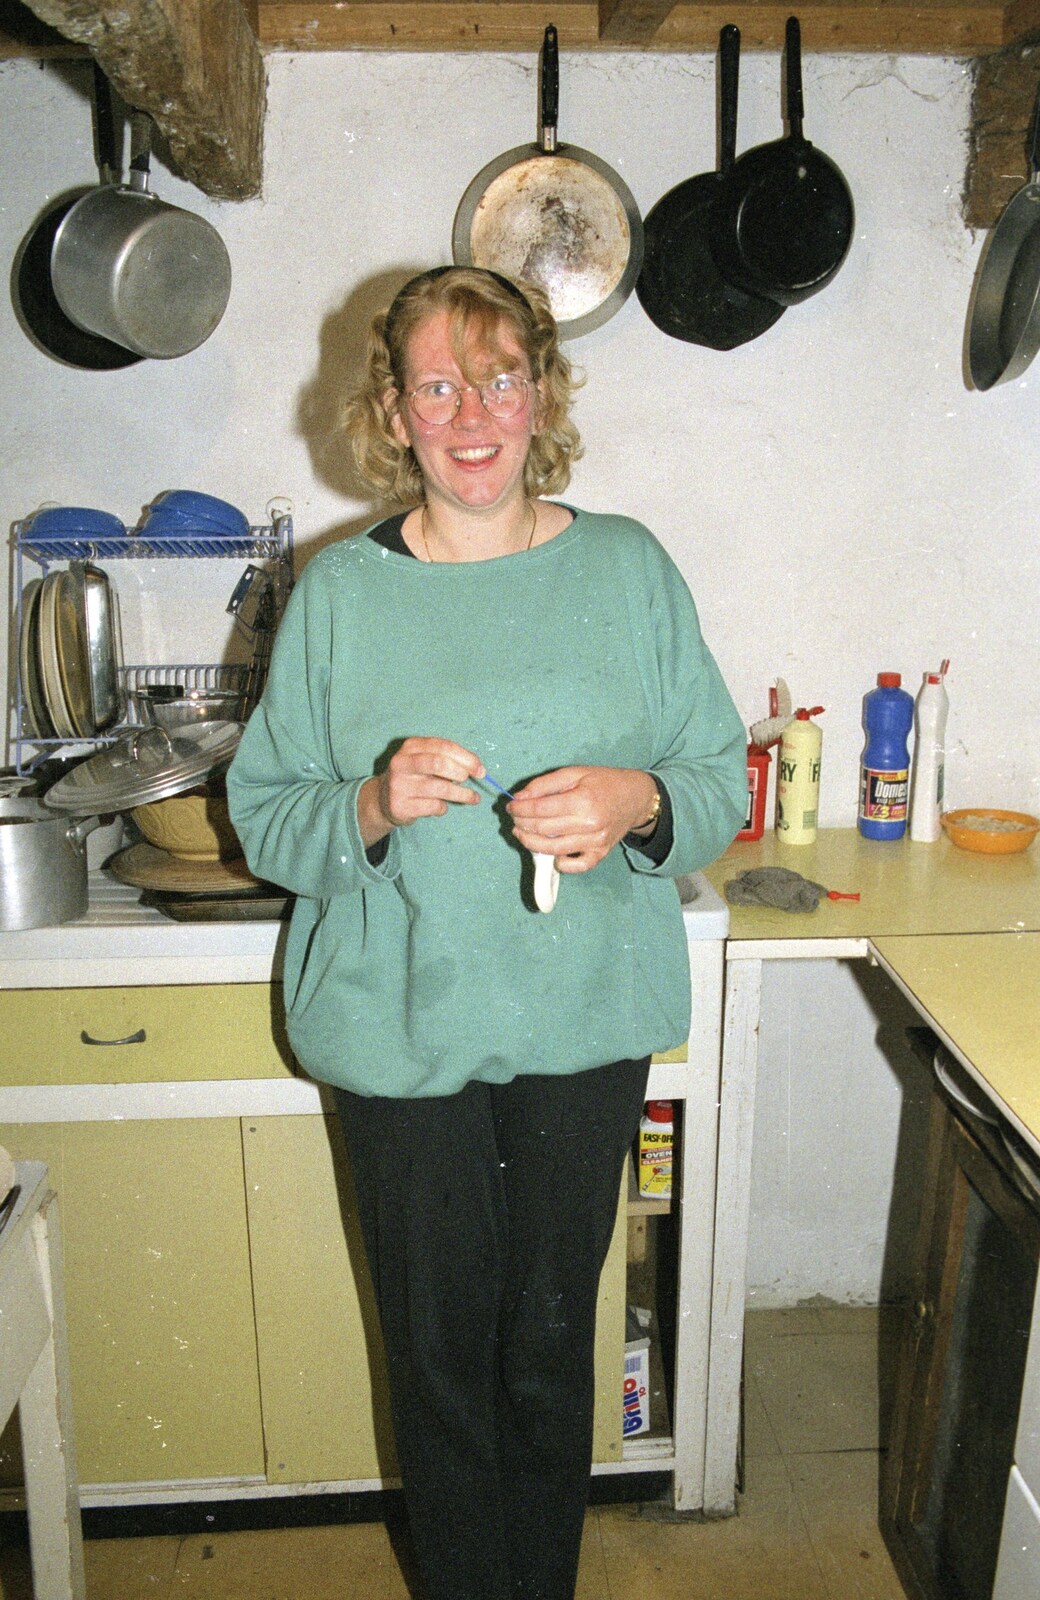 Liz's Party, Abergavenny, Monmouthshire, Wales - 4th August 1990: Liz in the kitchen